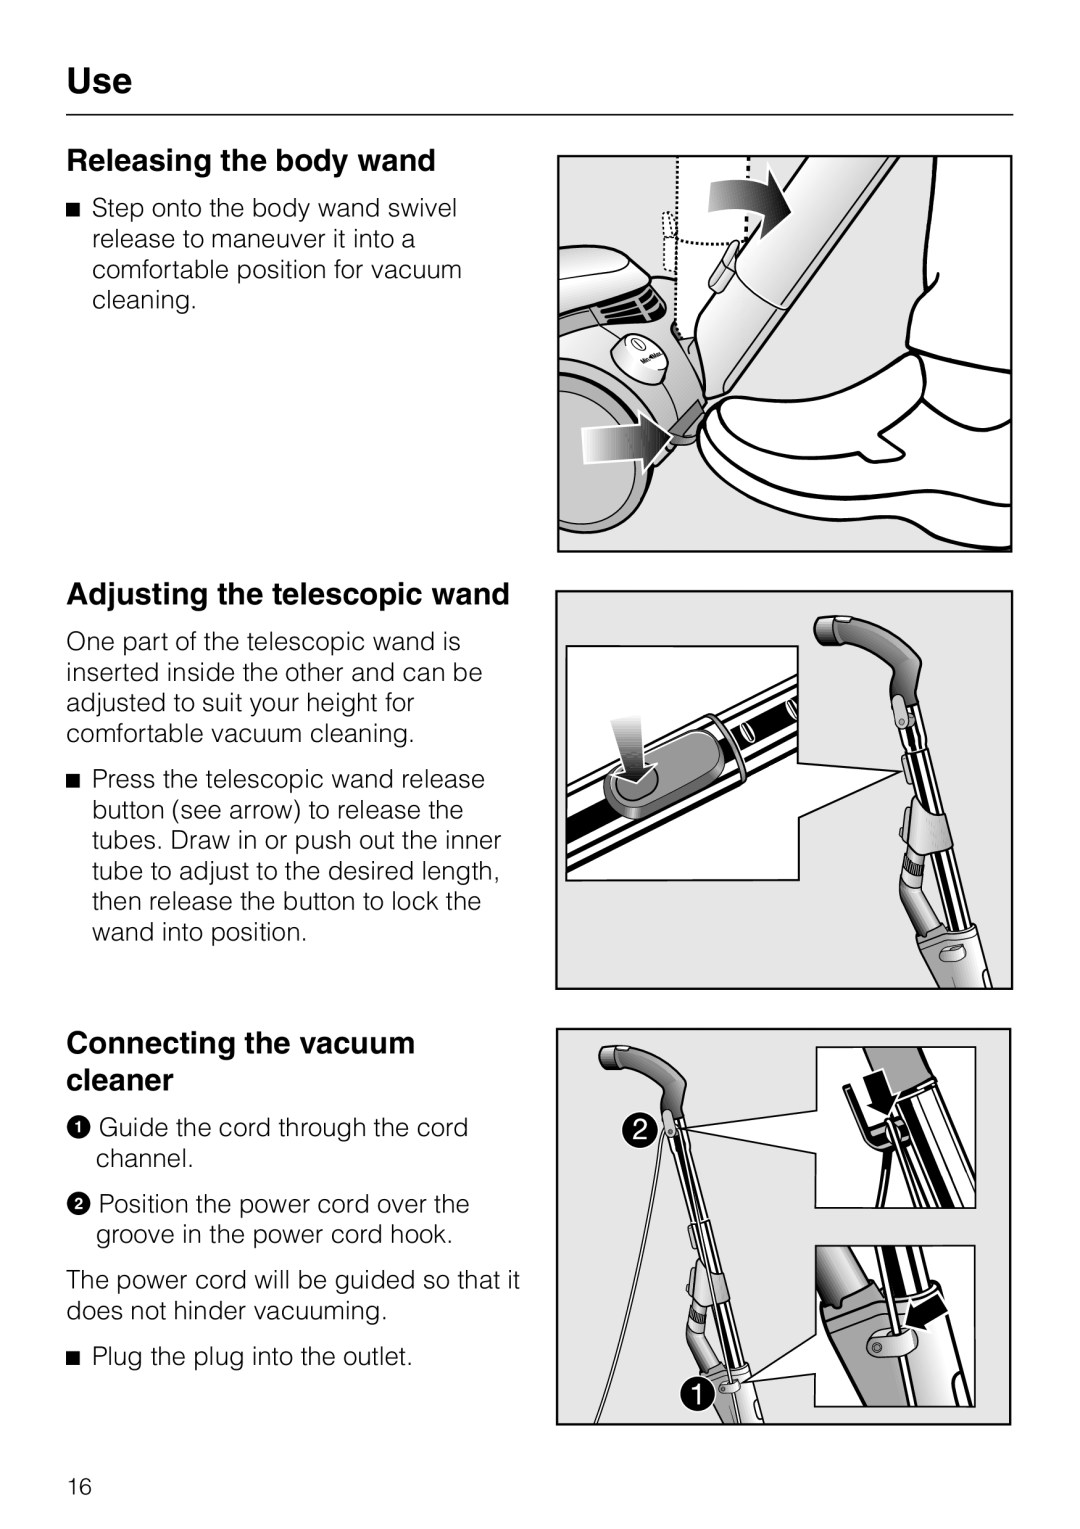 Miele HS09 operating instructions Releasing the body wand, Adjusting the telescopic wand, Connecting the vacuum cleaner 